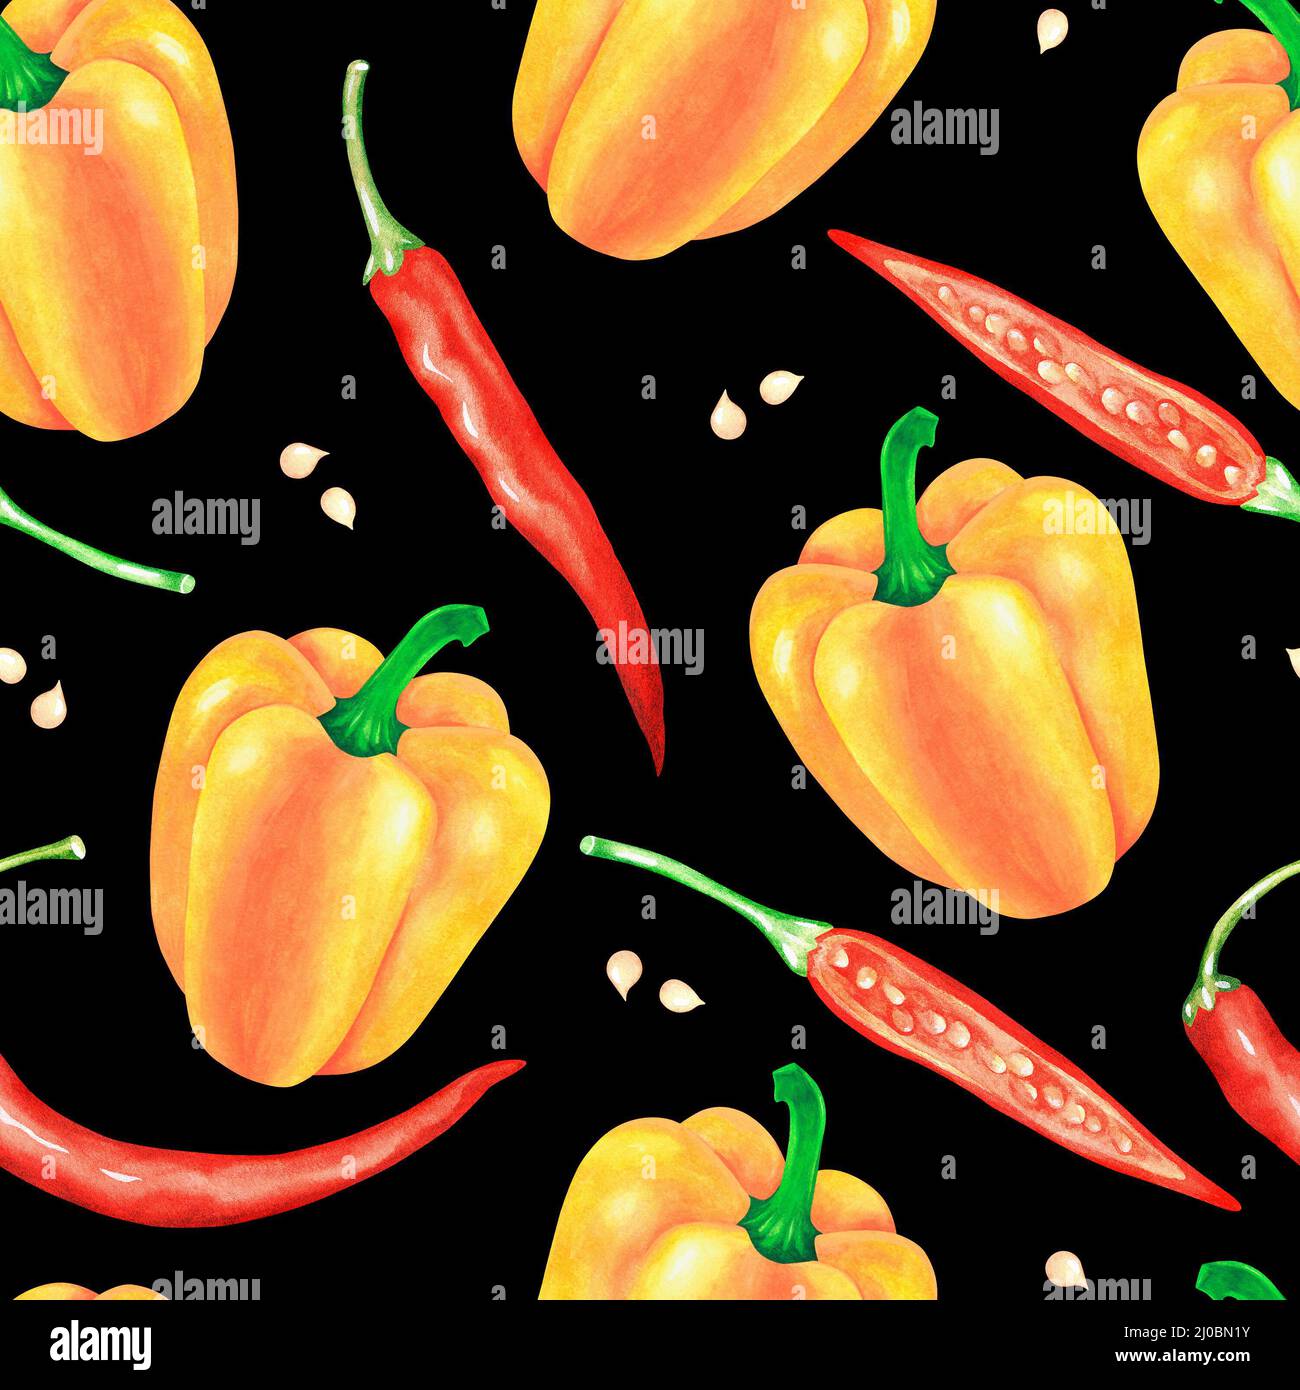 Sweet yellow and red hot pepper. Seamless pattern. Watercolor illustration. Isolated on a black background. For your design cookbooks, aprons. Stock Photo